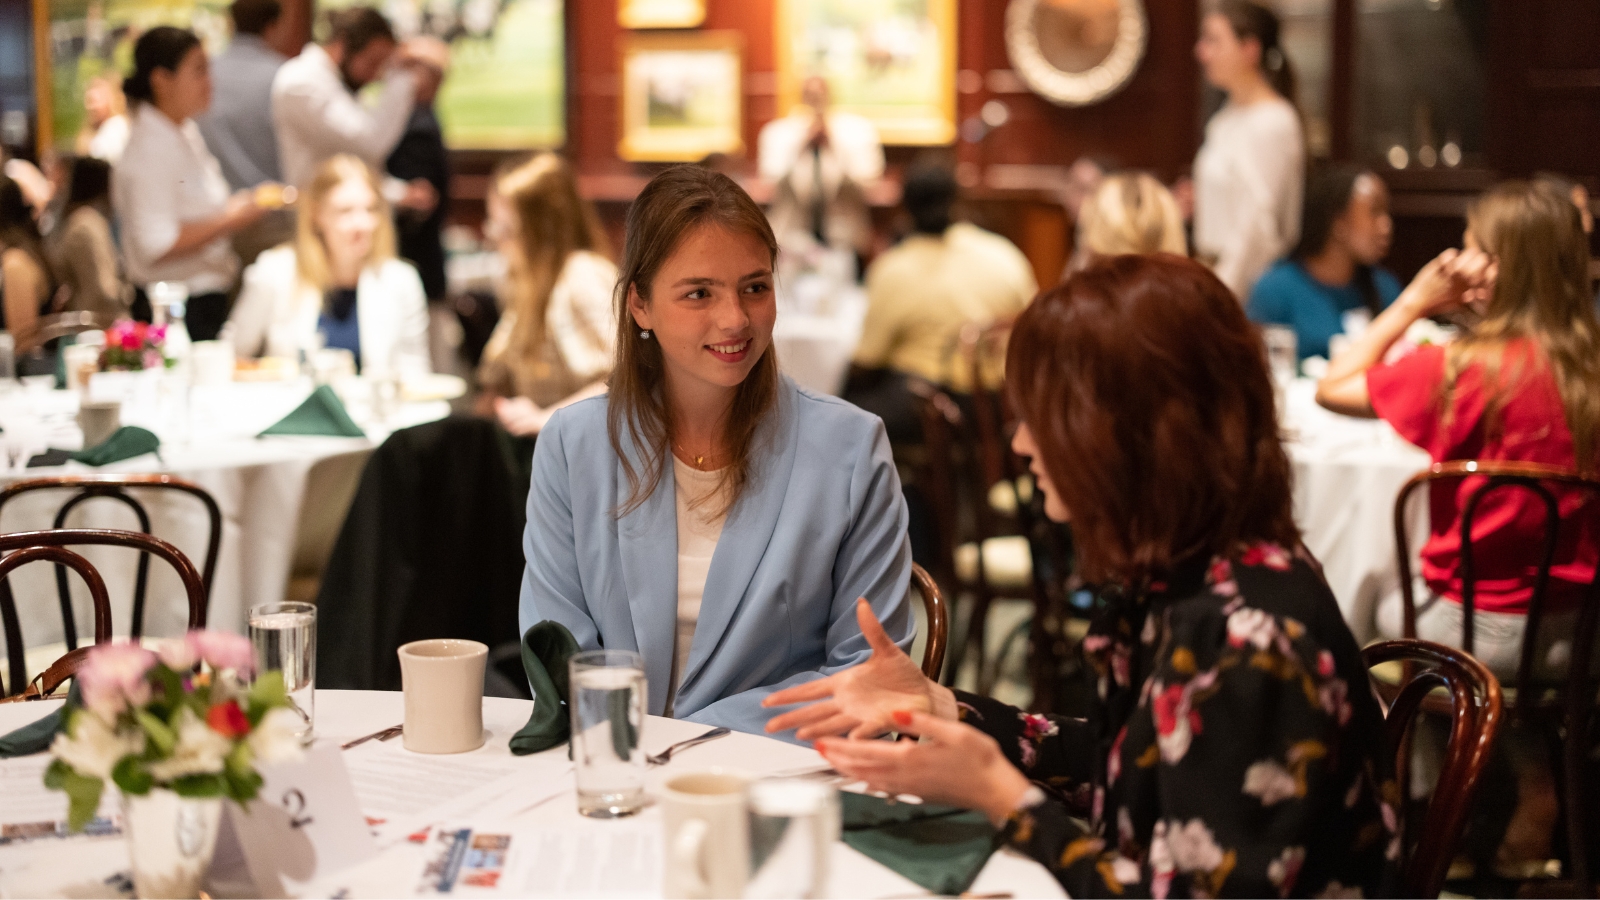 elm-pg-billboard-app DC - Mentor bfast woman in blue jacket at table with mentor